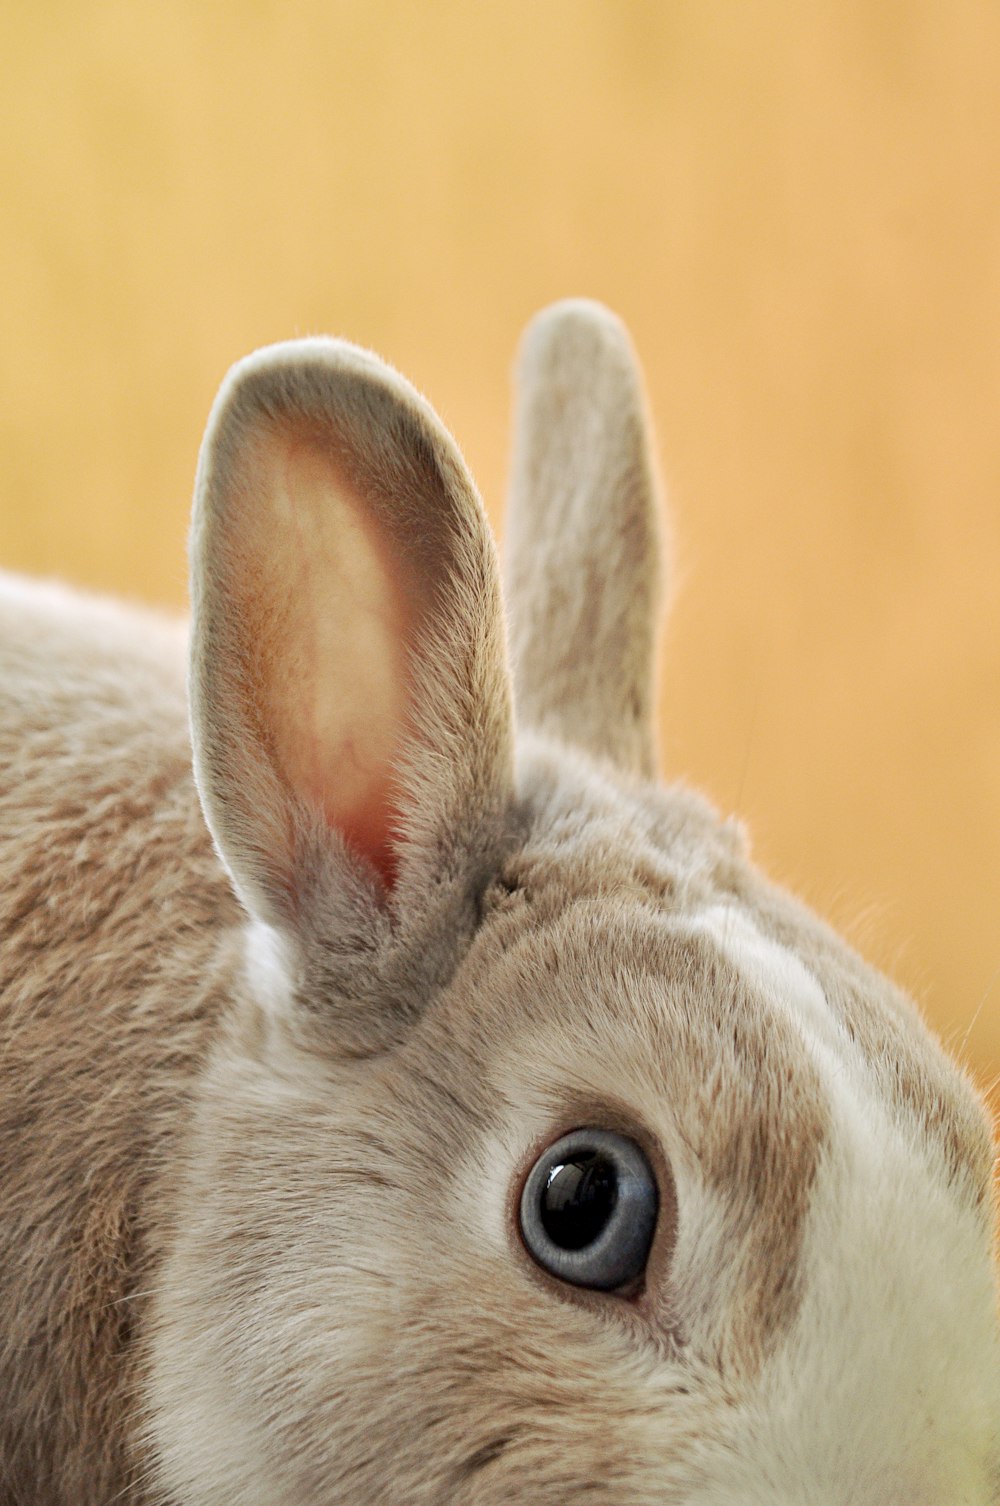 Rabbit Ears Pictures  Download Free Images on Unsplash